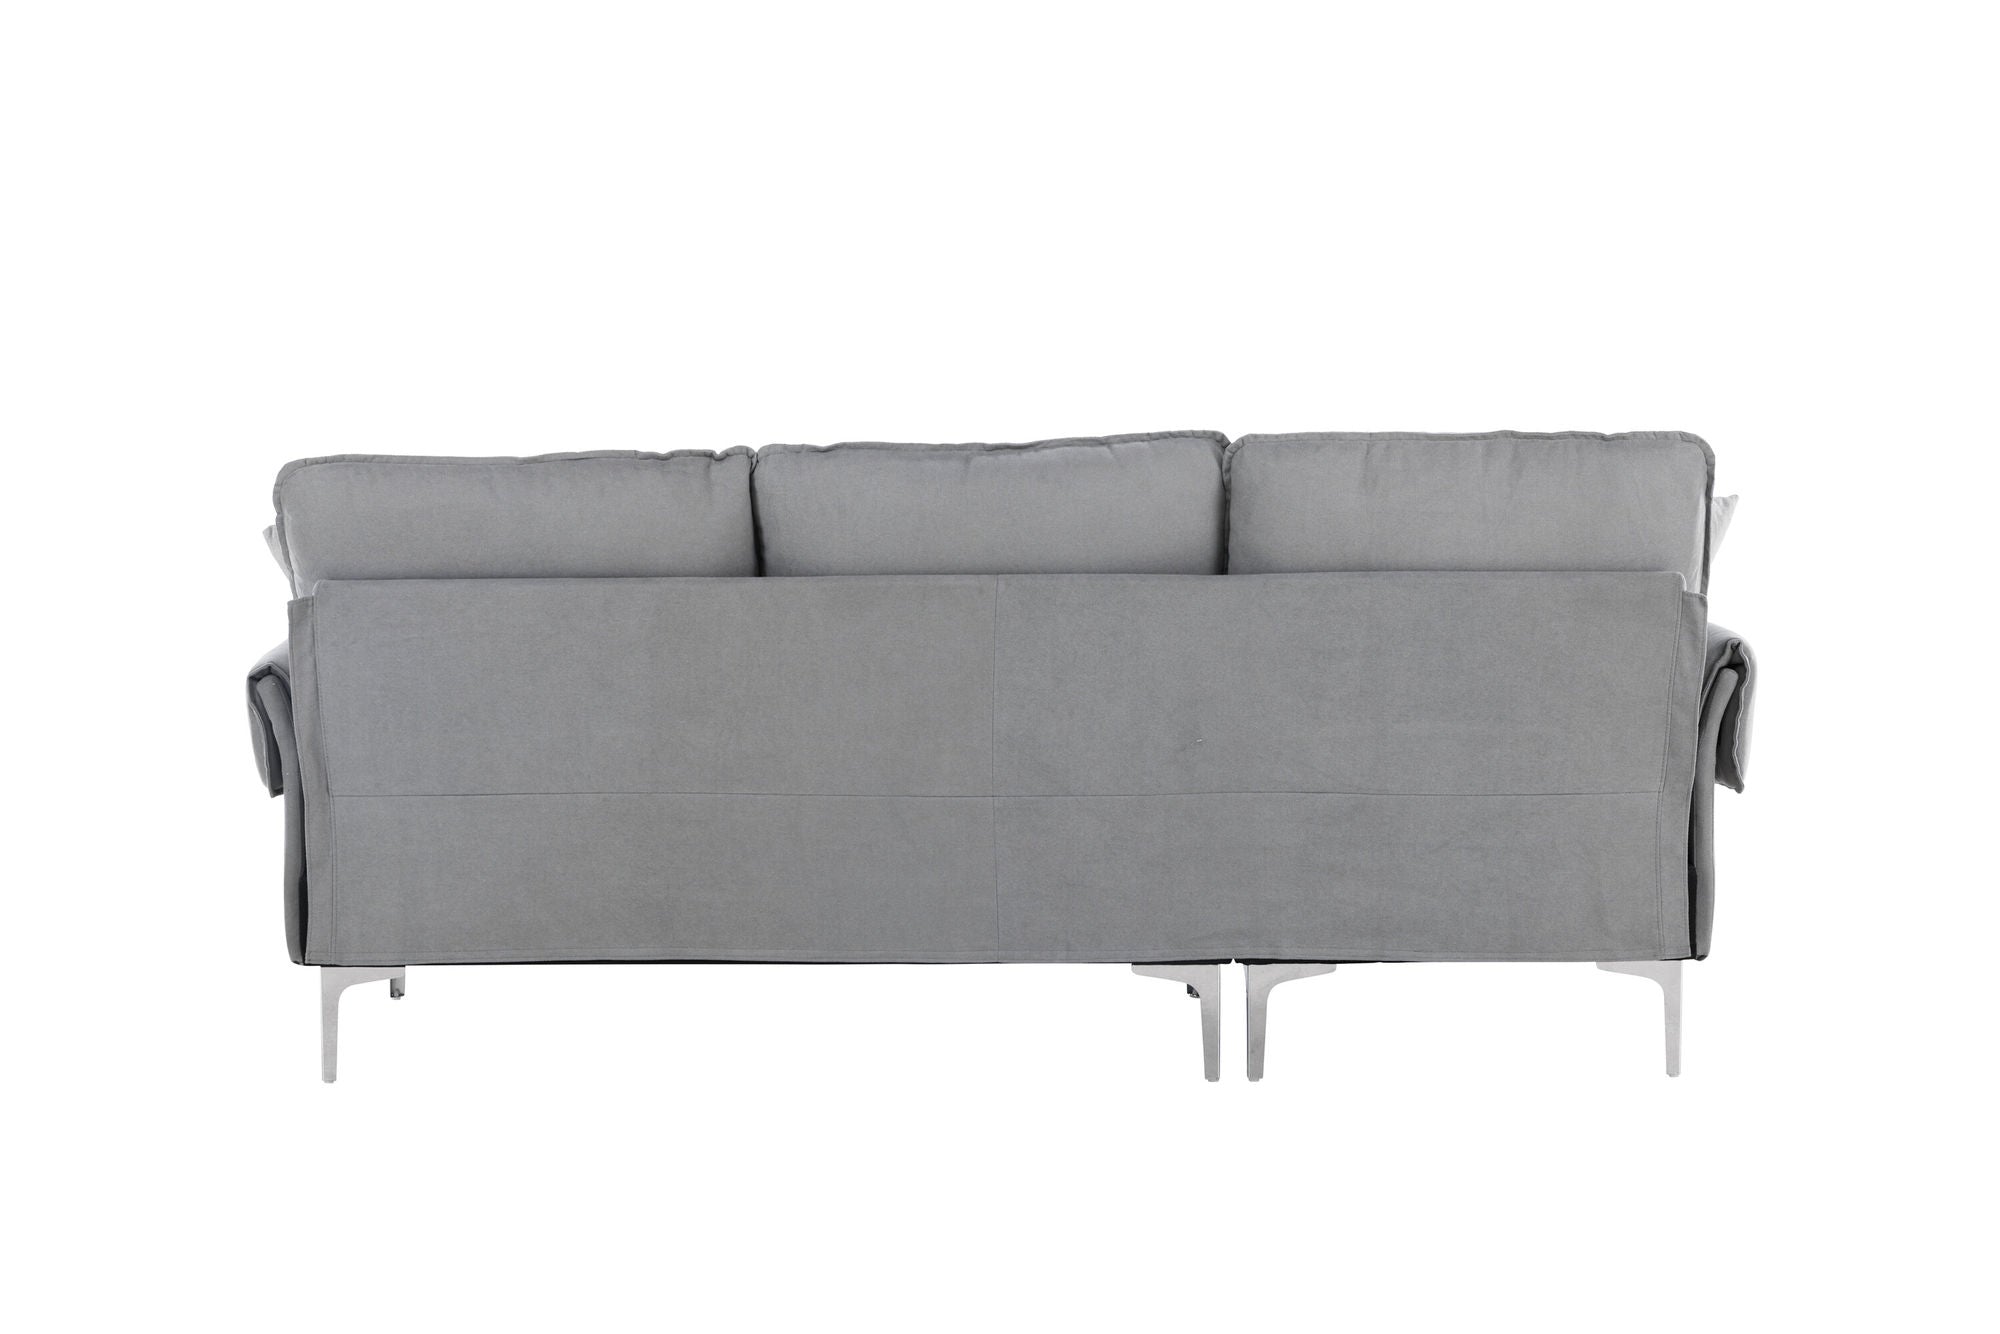 Venture Home Toulouse Sofa - Grey Fabric